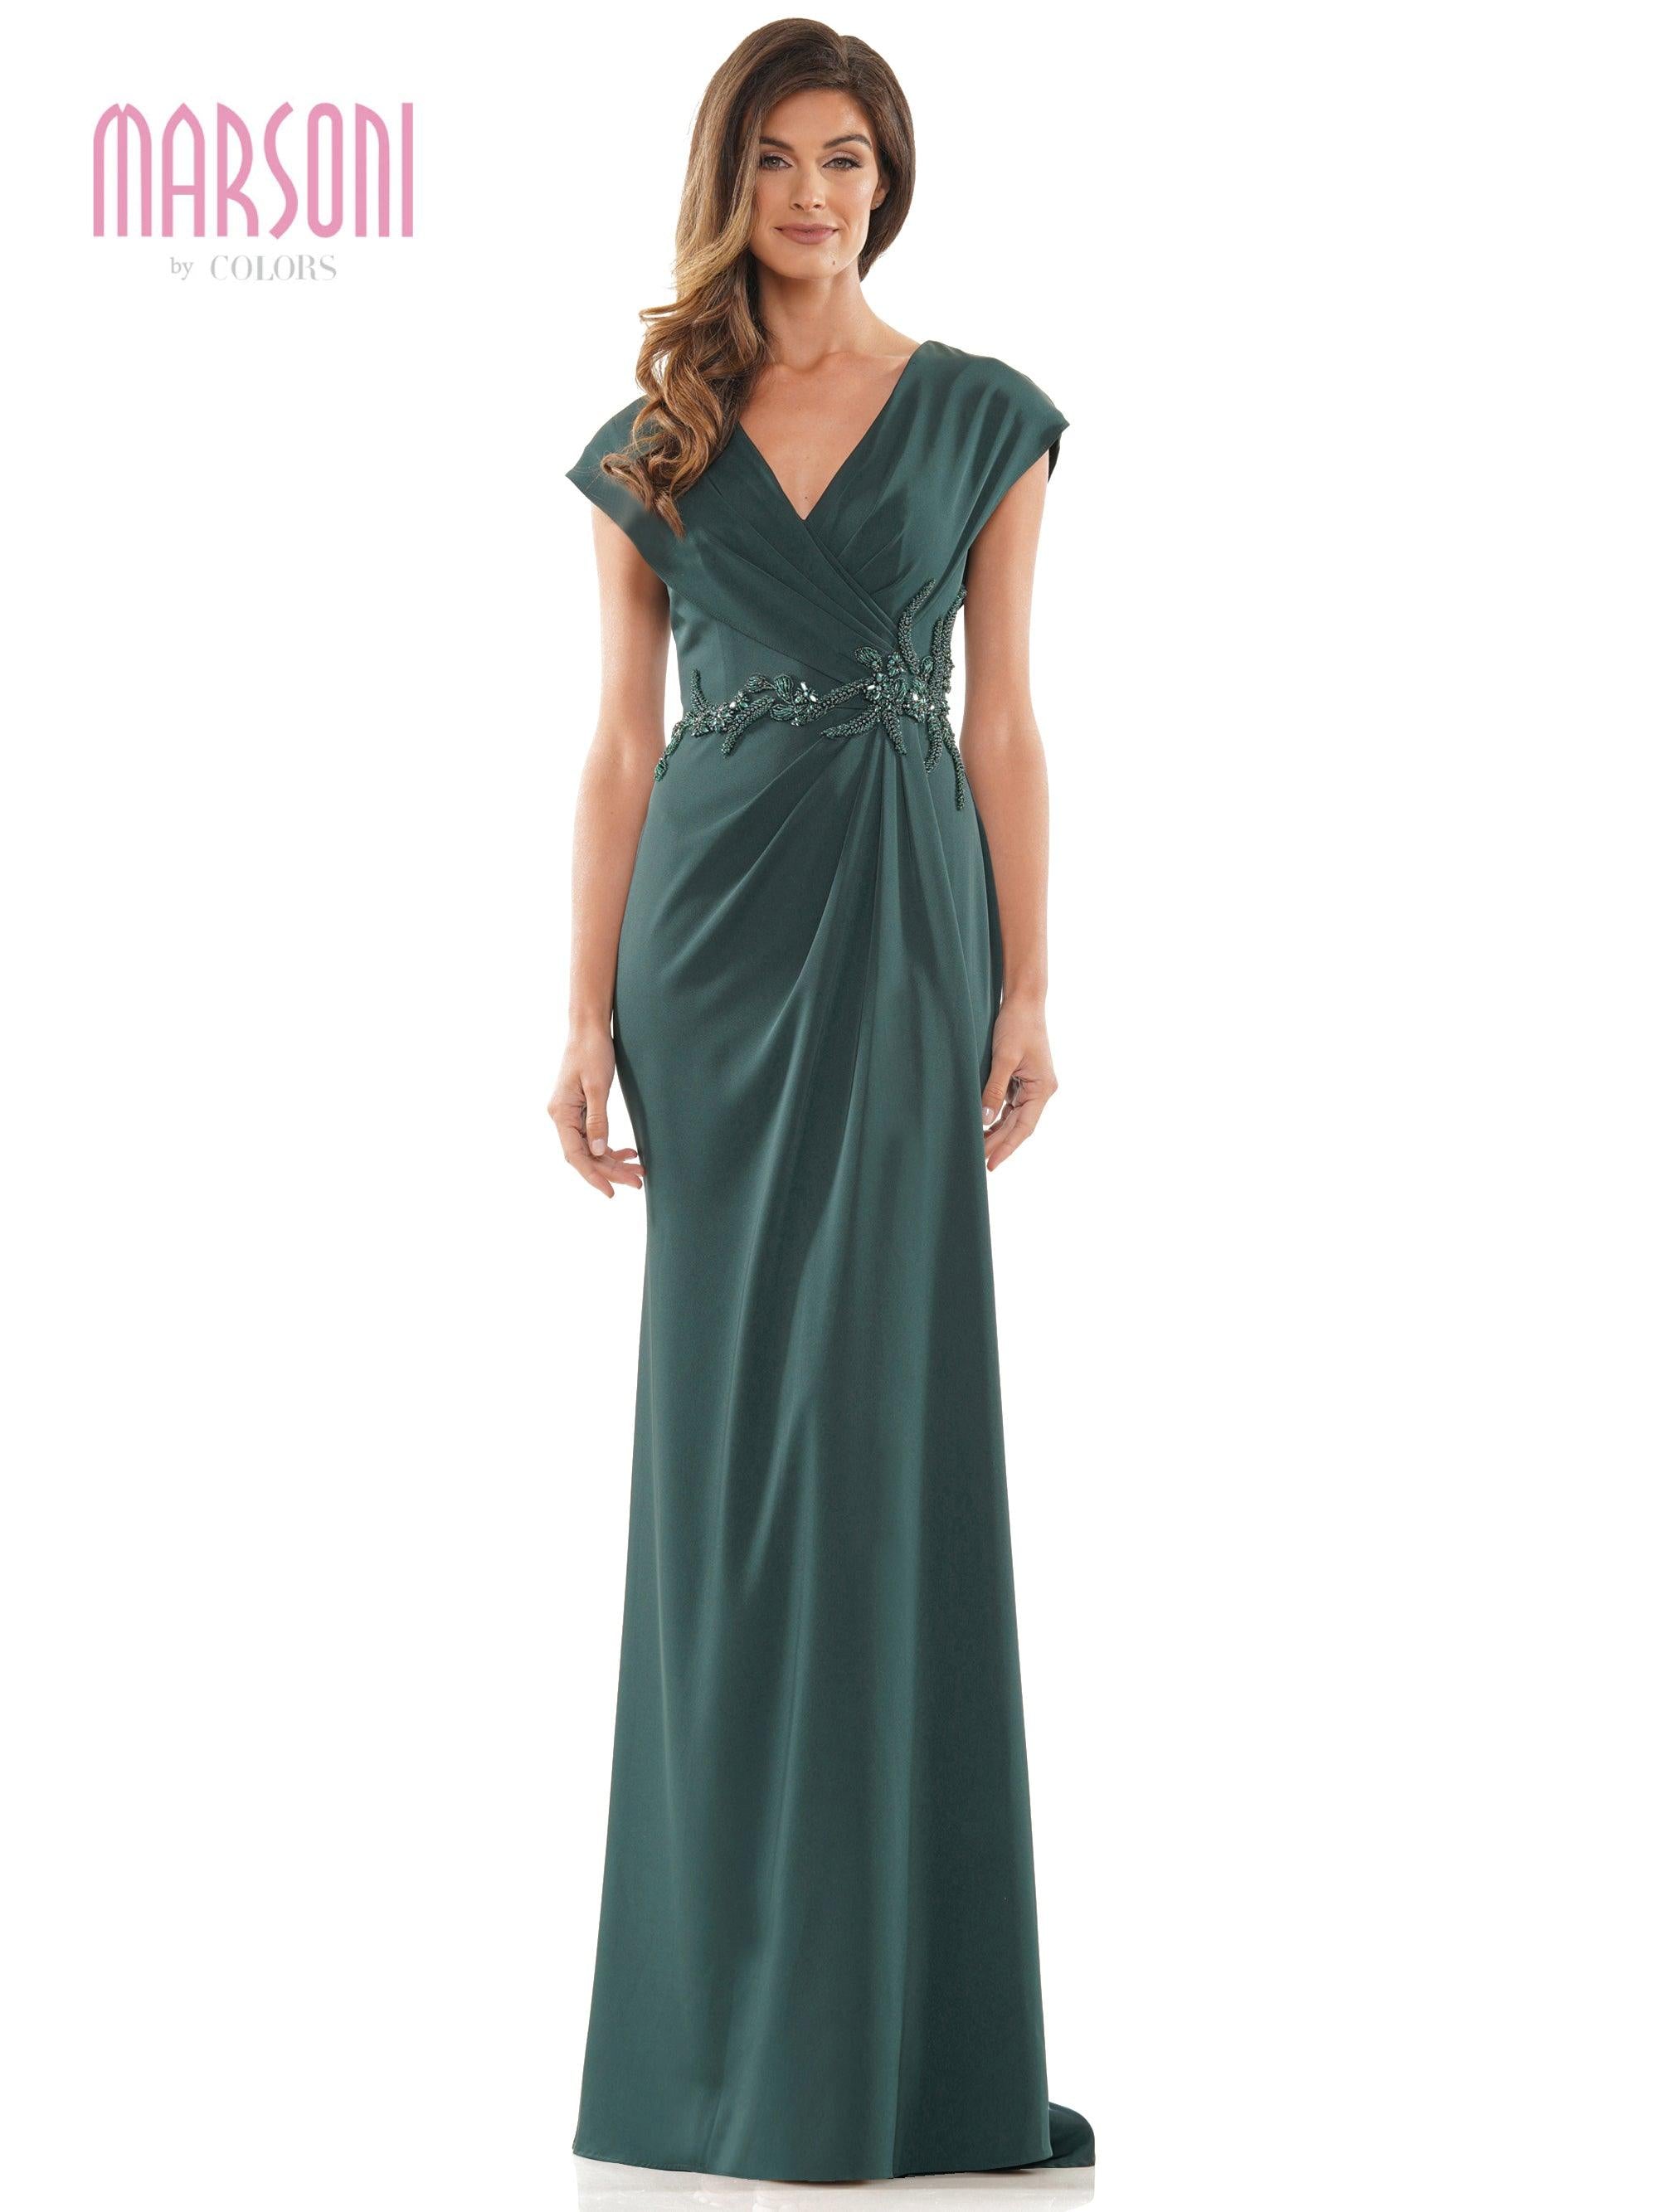 Marsoni Mother of the Bride Long Dress 1226 - The Dress Outlet